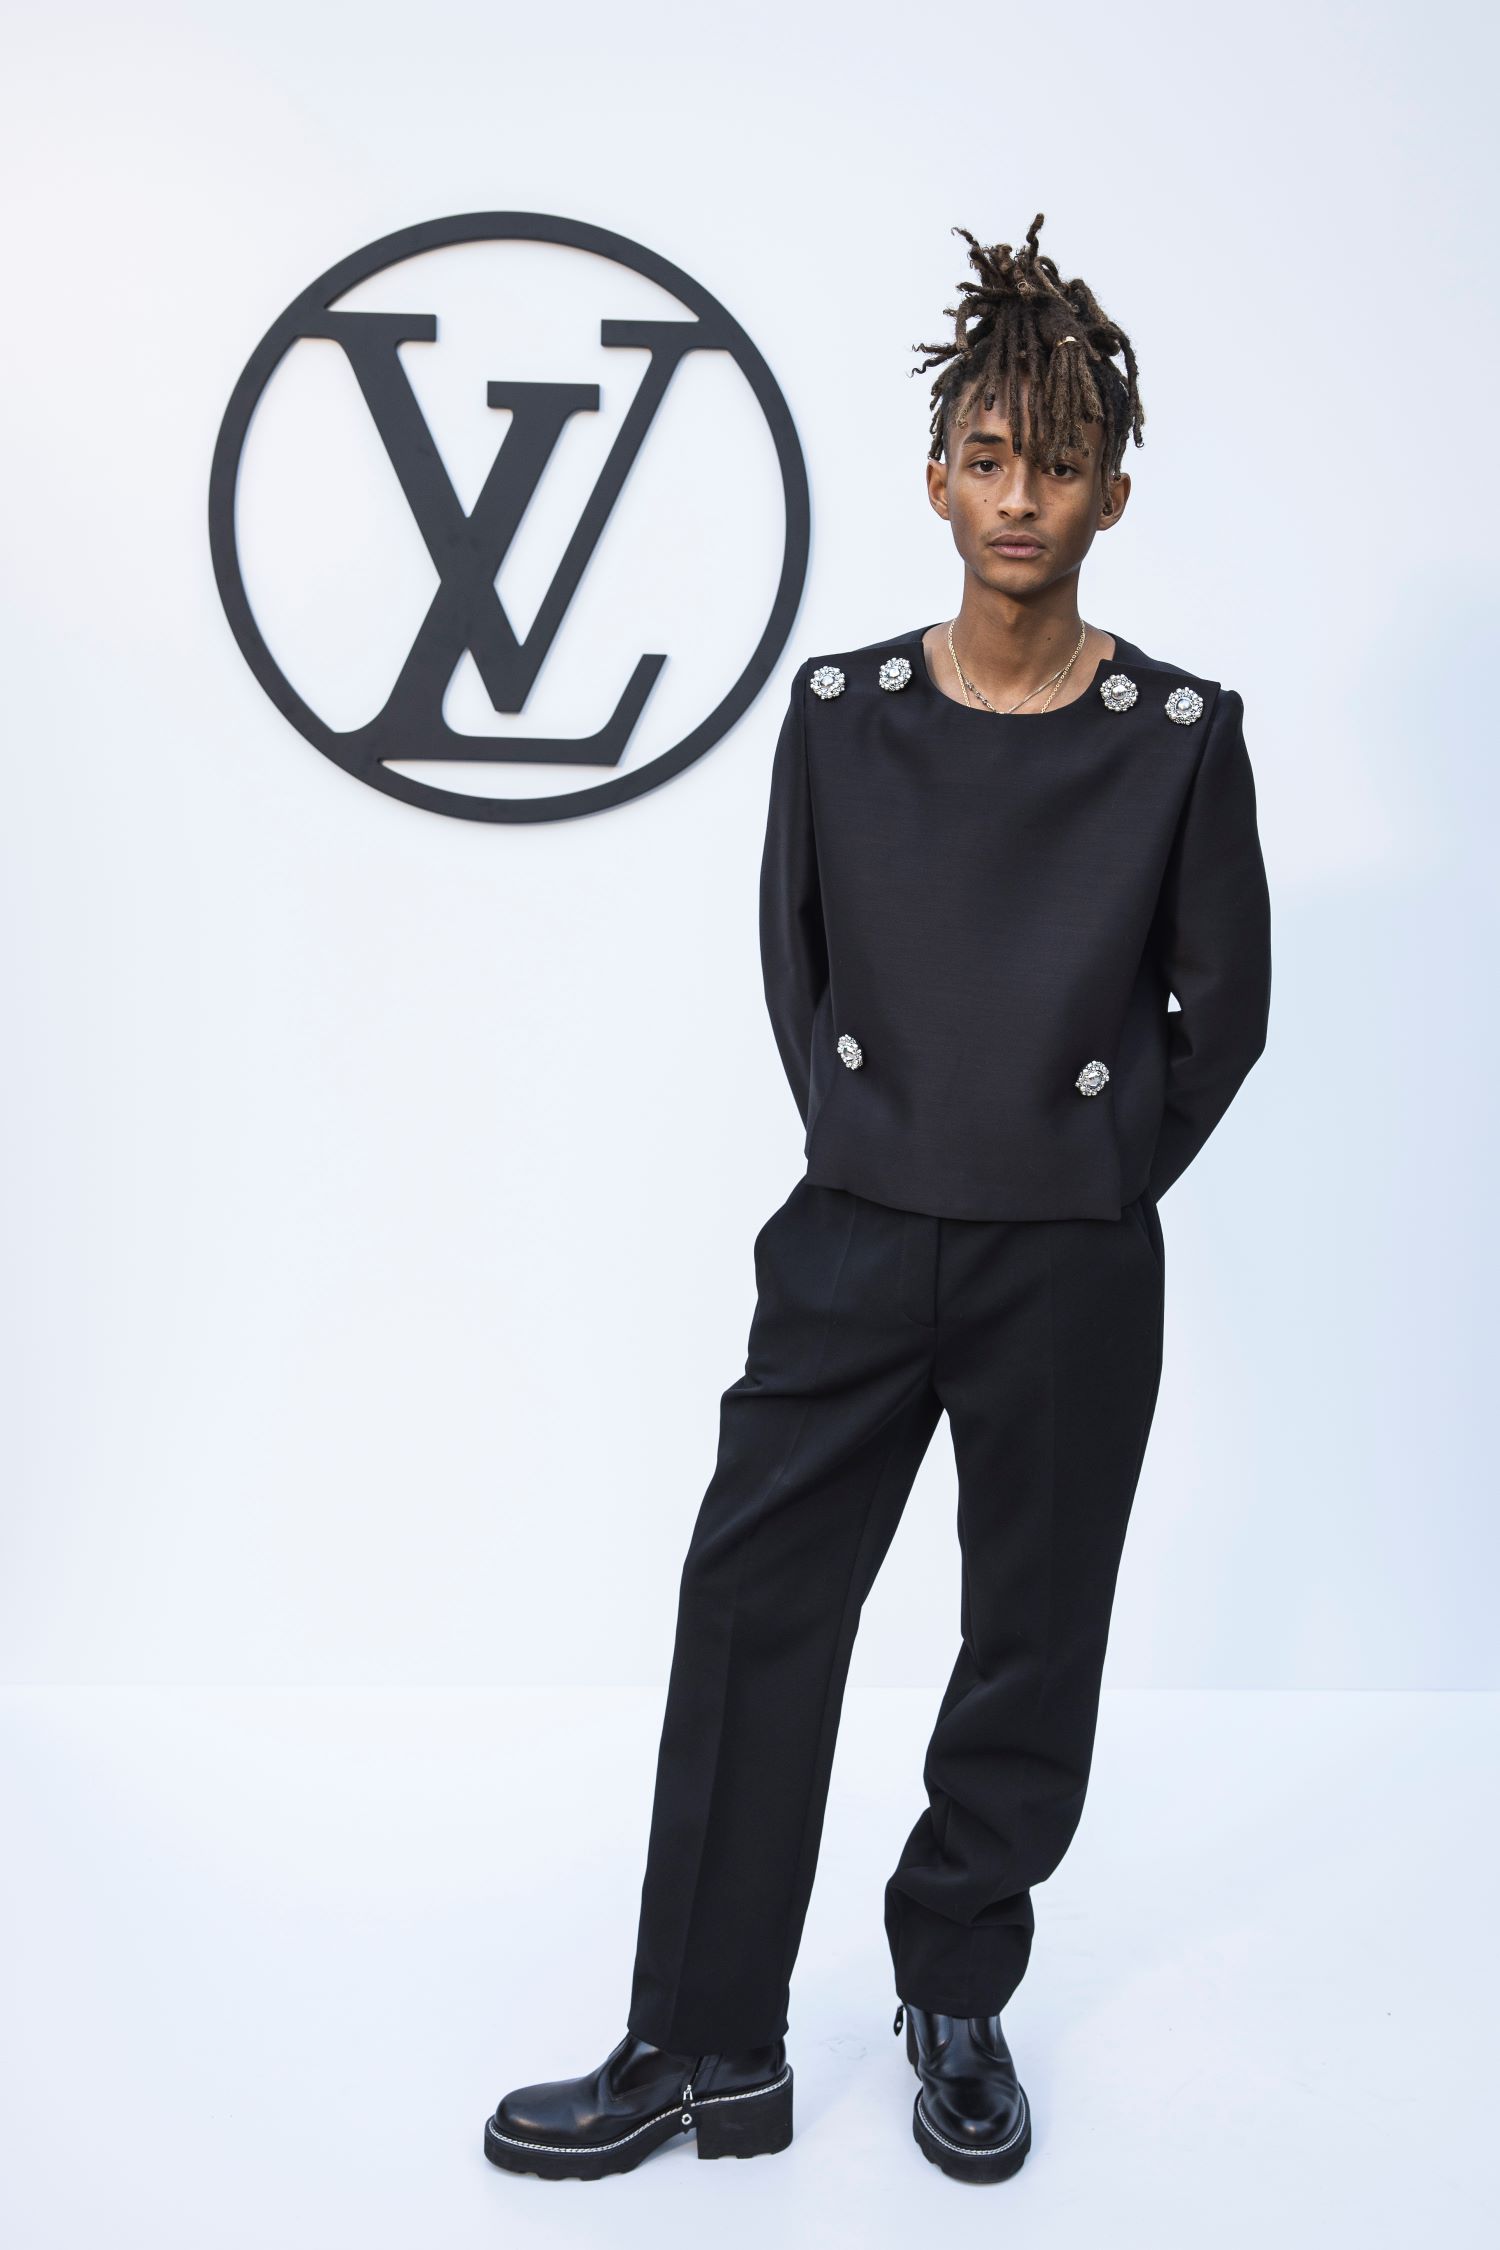 Jaden Smith attending the Cruise 2025 Fashion Show by Louis Vuitton in Barcelona | CRUISE 2025 FASHION SHOW COLLECTION © Louis Vuitton – All rights reserved | Courtesy of Gnazzo Group.